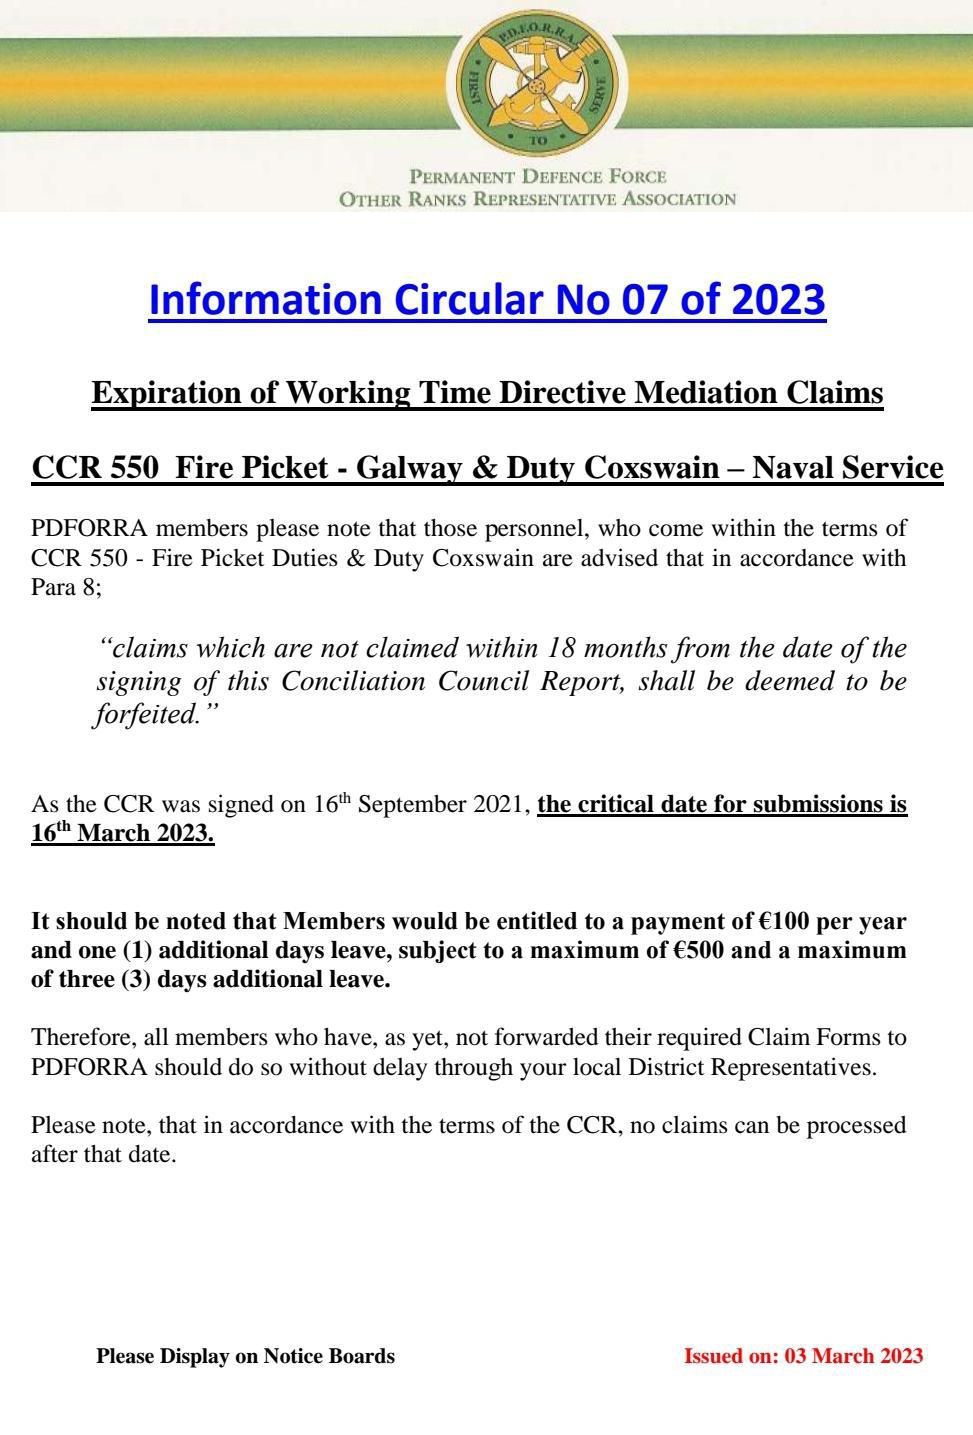 Information Circular No 07 of 2023 - Finalisation of WTD Claims Fire Picket Galway & Duty Coxswain Navy